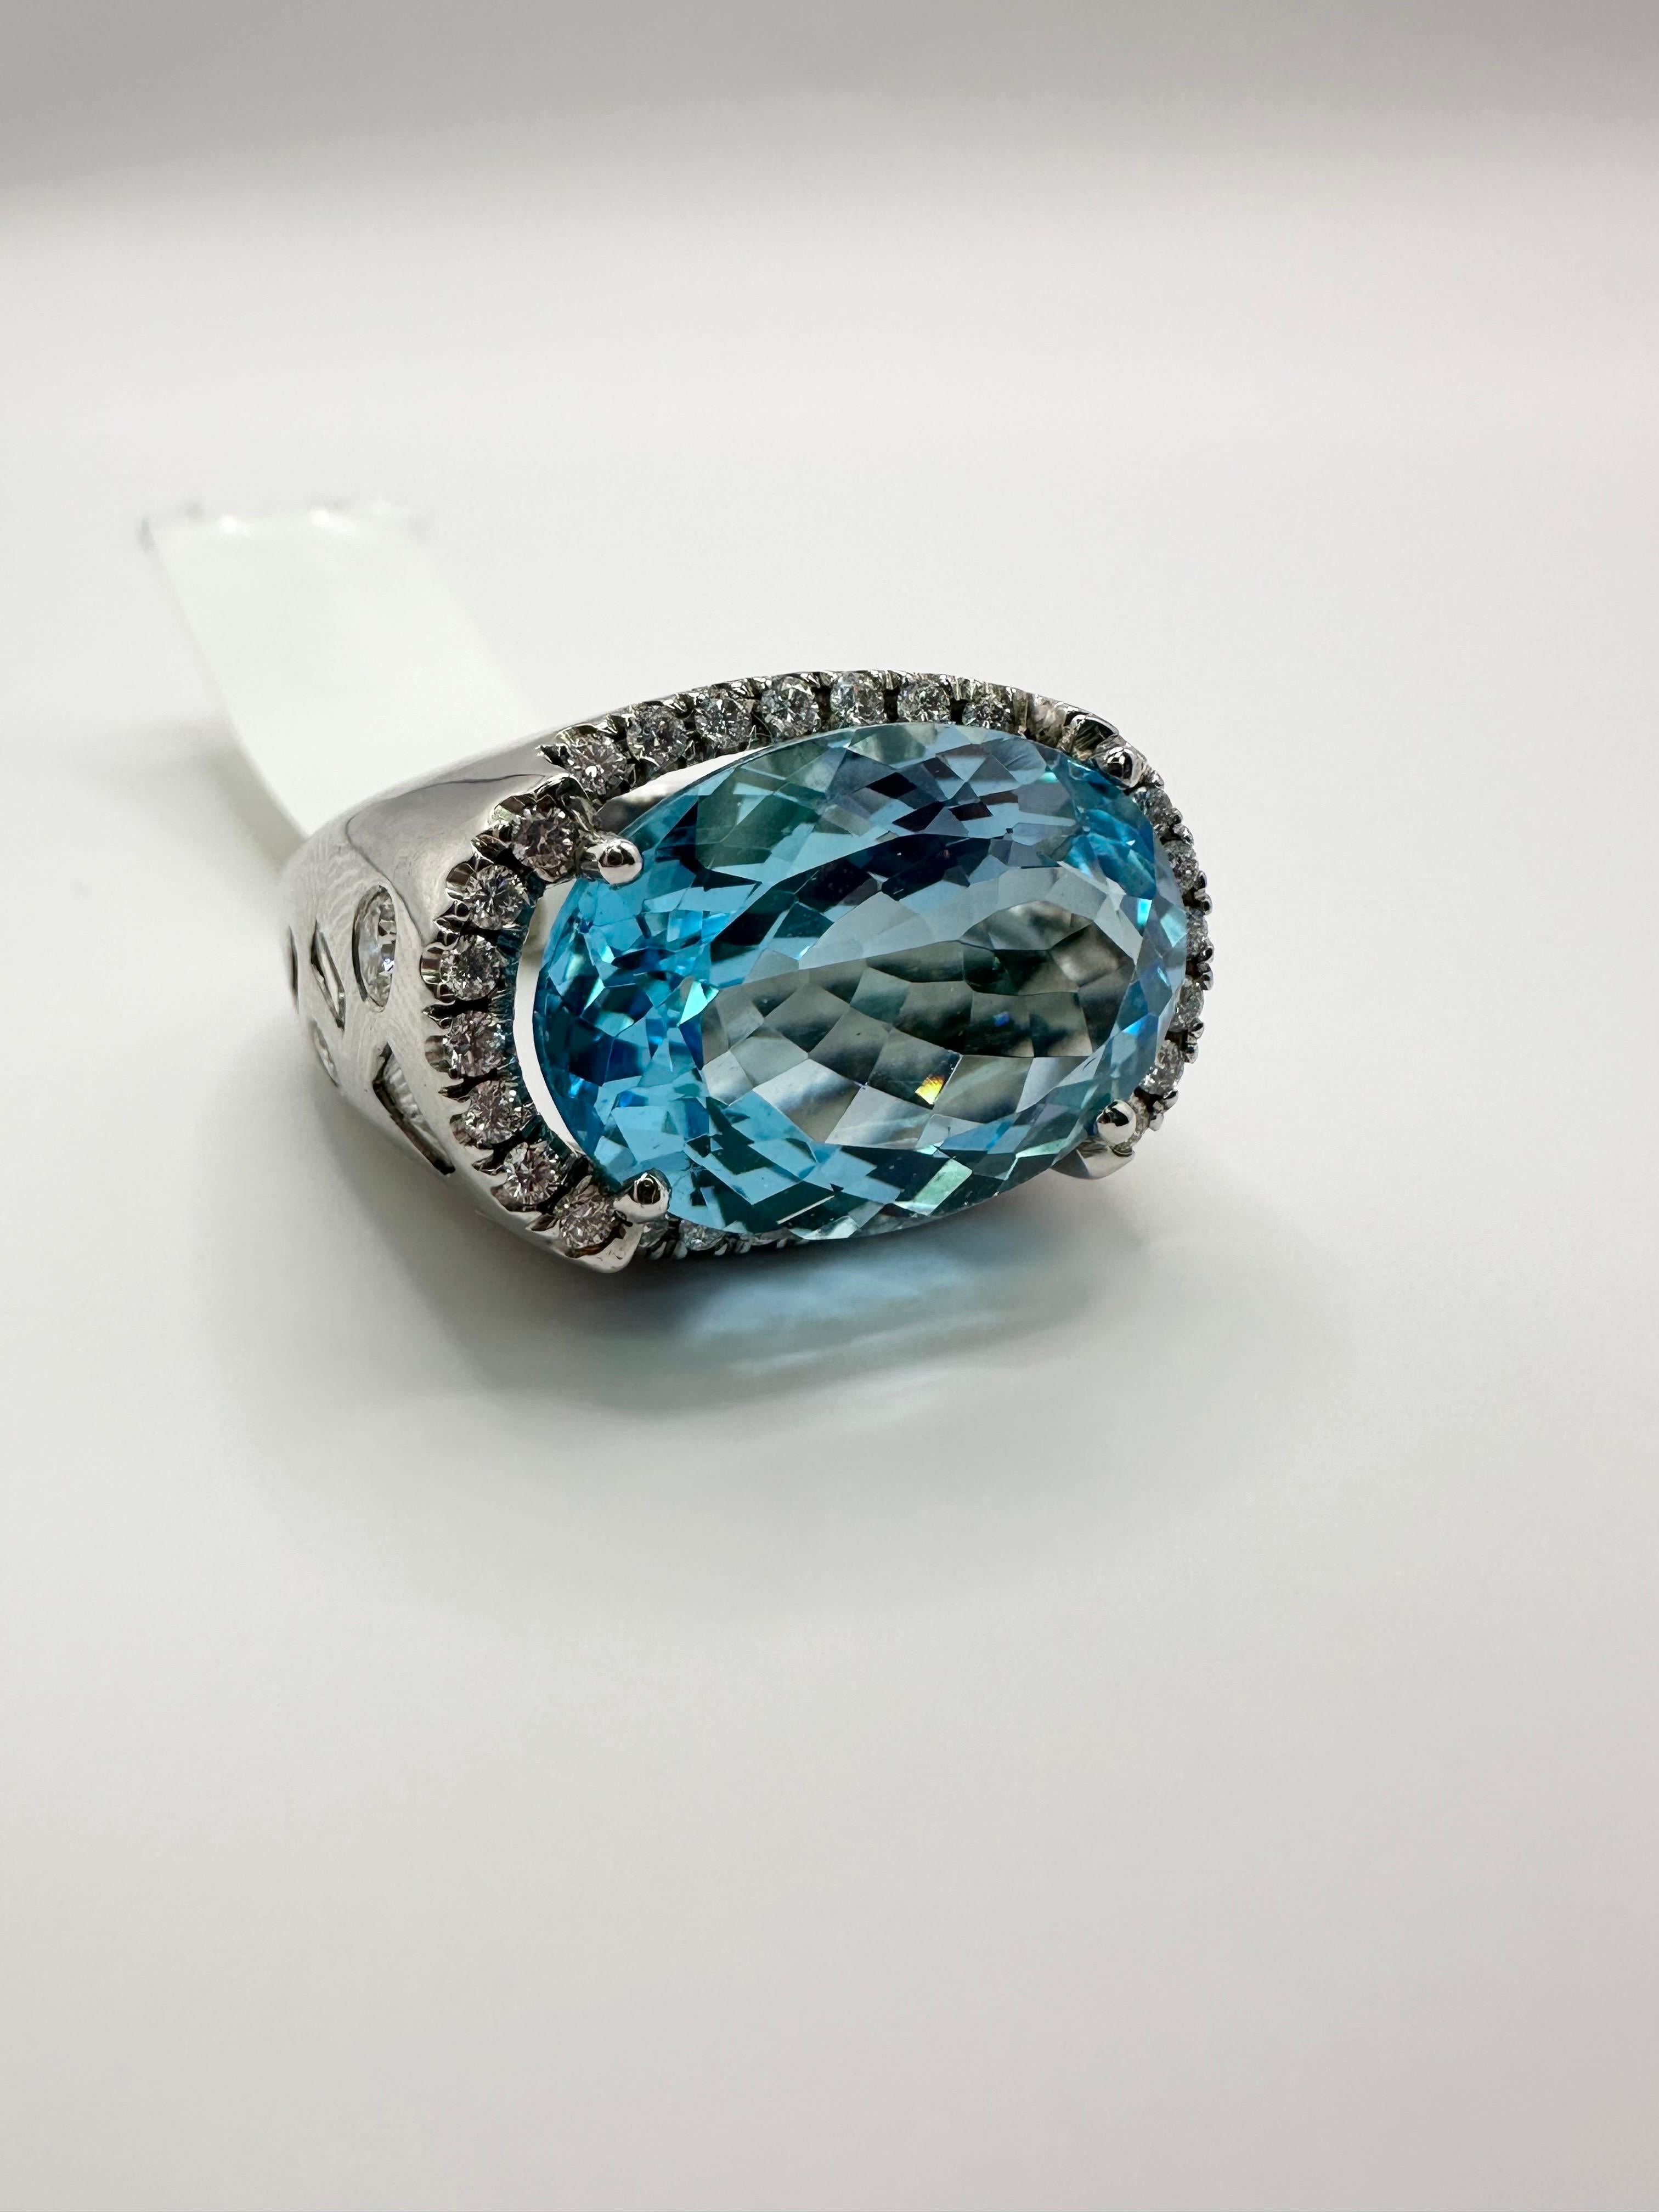 Stunning blue topaz cocktail ring in 14Kt white gold, large center at more than 18 carats and fine quality diamonds weighing 1.45 carats, made so well with hand finish and excellent craftsmanship.

Metal Type: 14KT

Natural Topaz(s): 
Color: